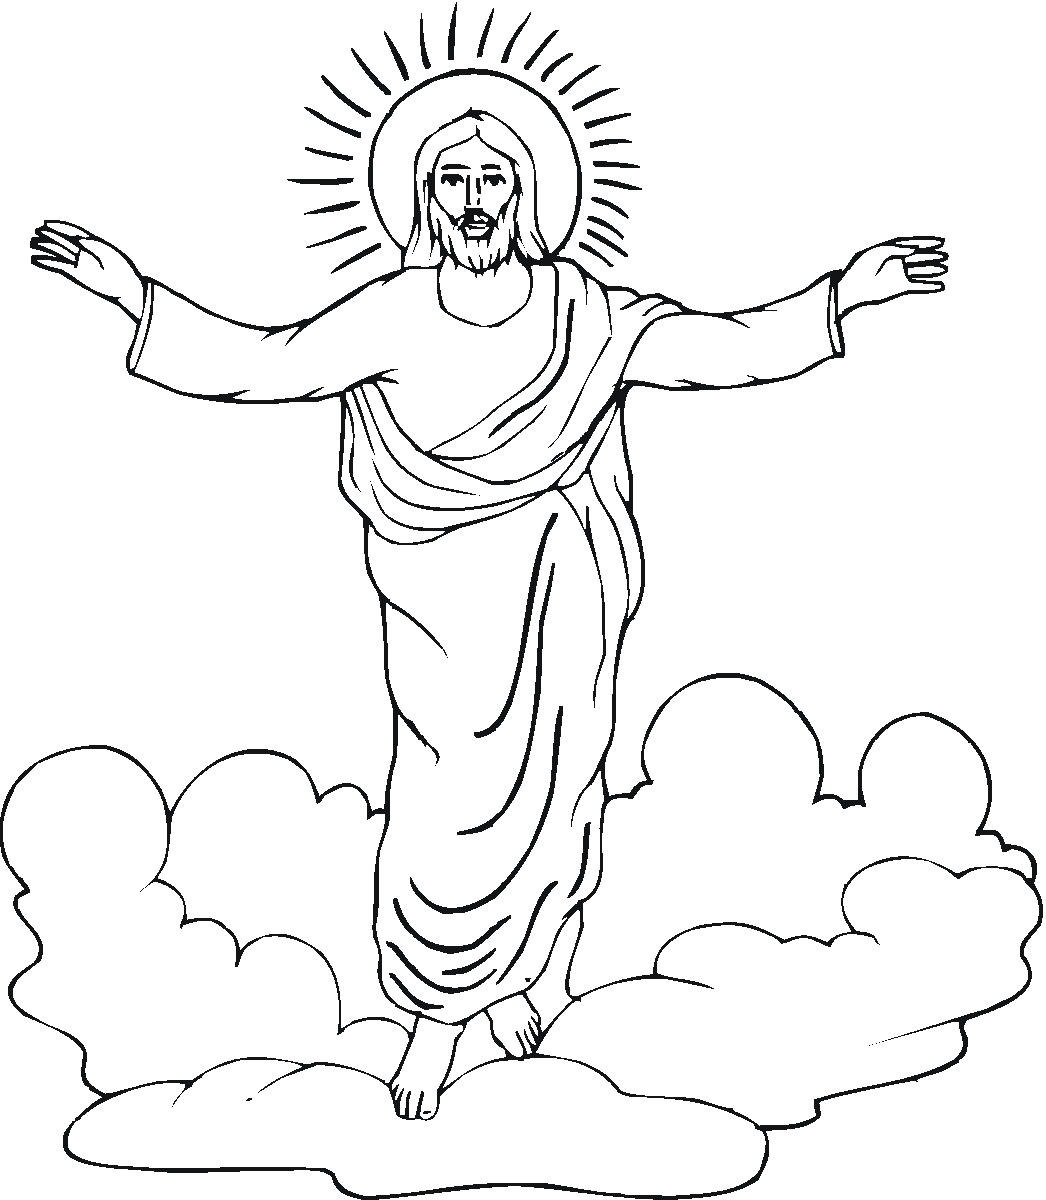 Download Easter Religious Coloring Page - 143+ SVG File for DIY Machine for Cricut, Silhouette and Other Machine